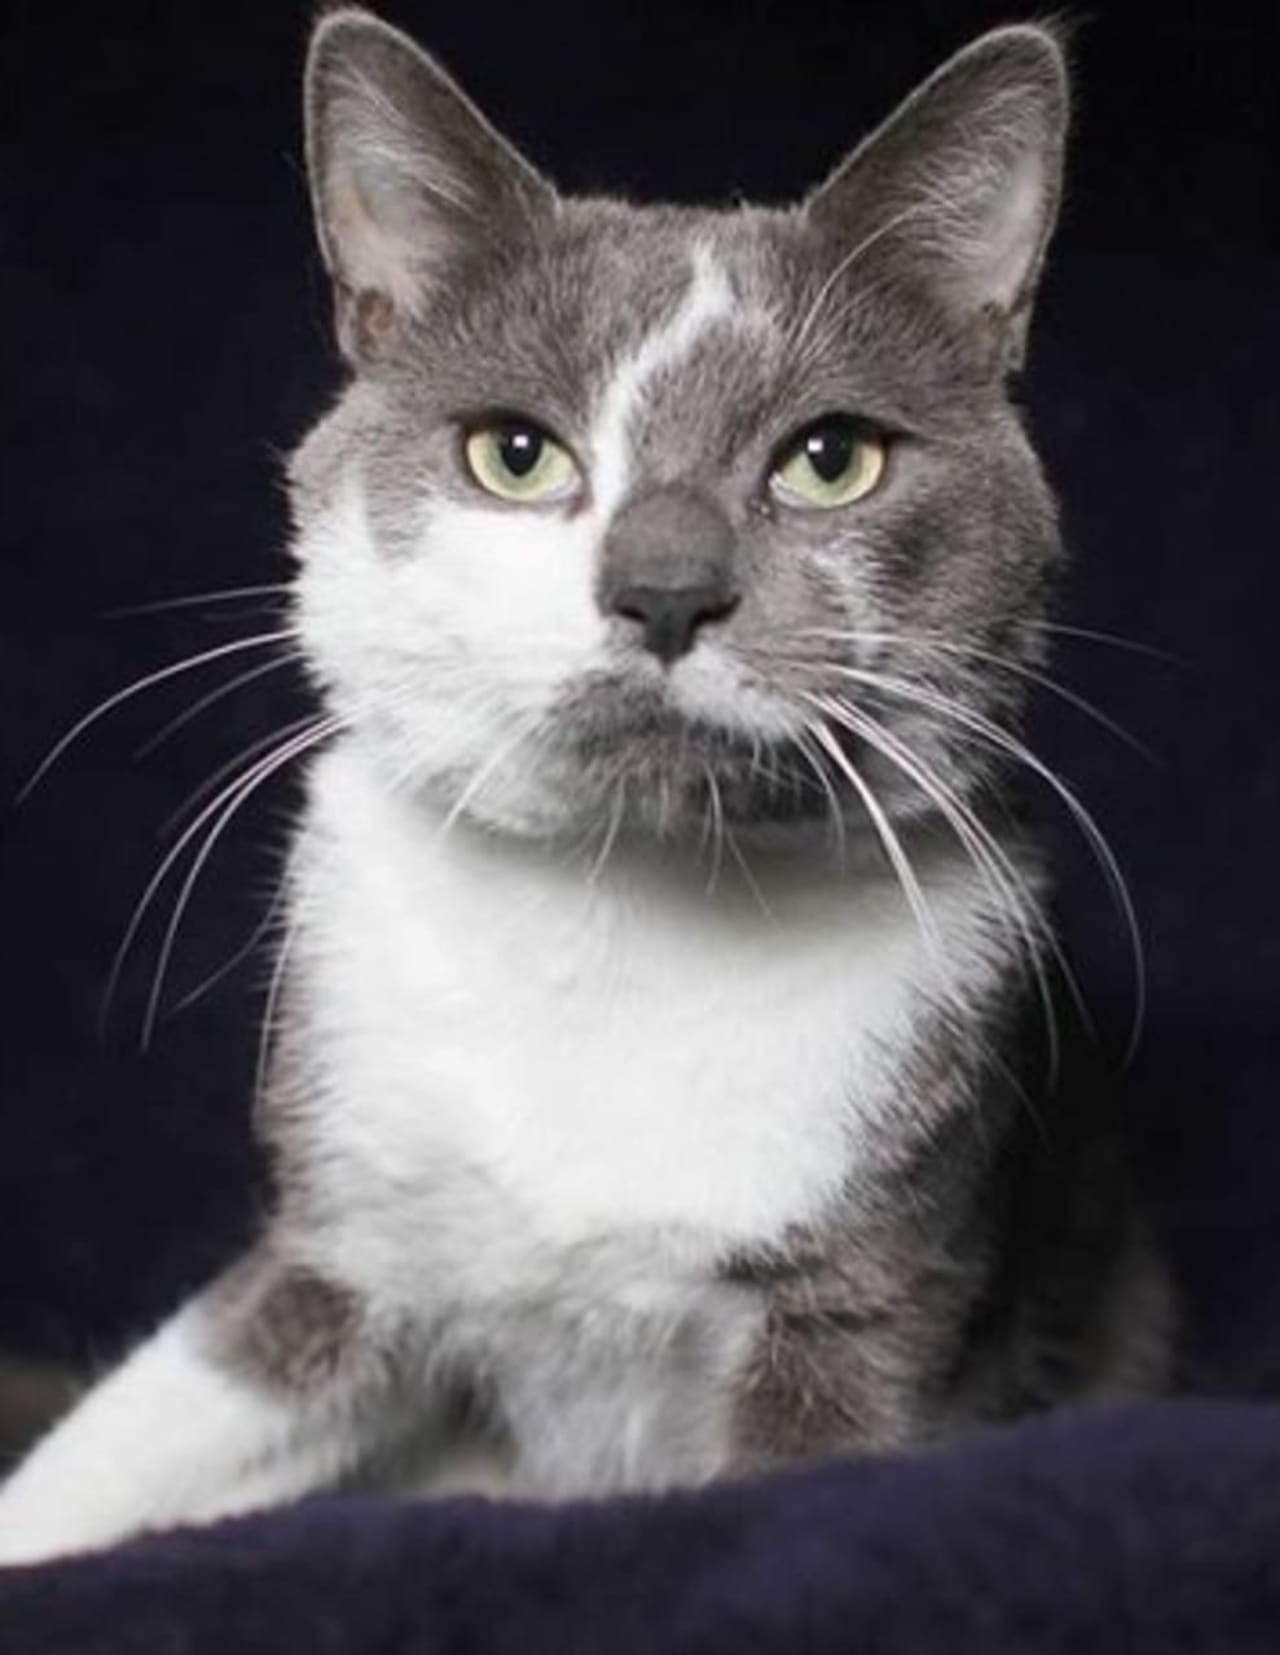 Thomas, a 1-year-old male, is sweet and "talkative" according to the folks at the Hi Tor Animal Care Center in Pomona.